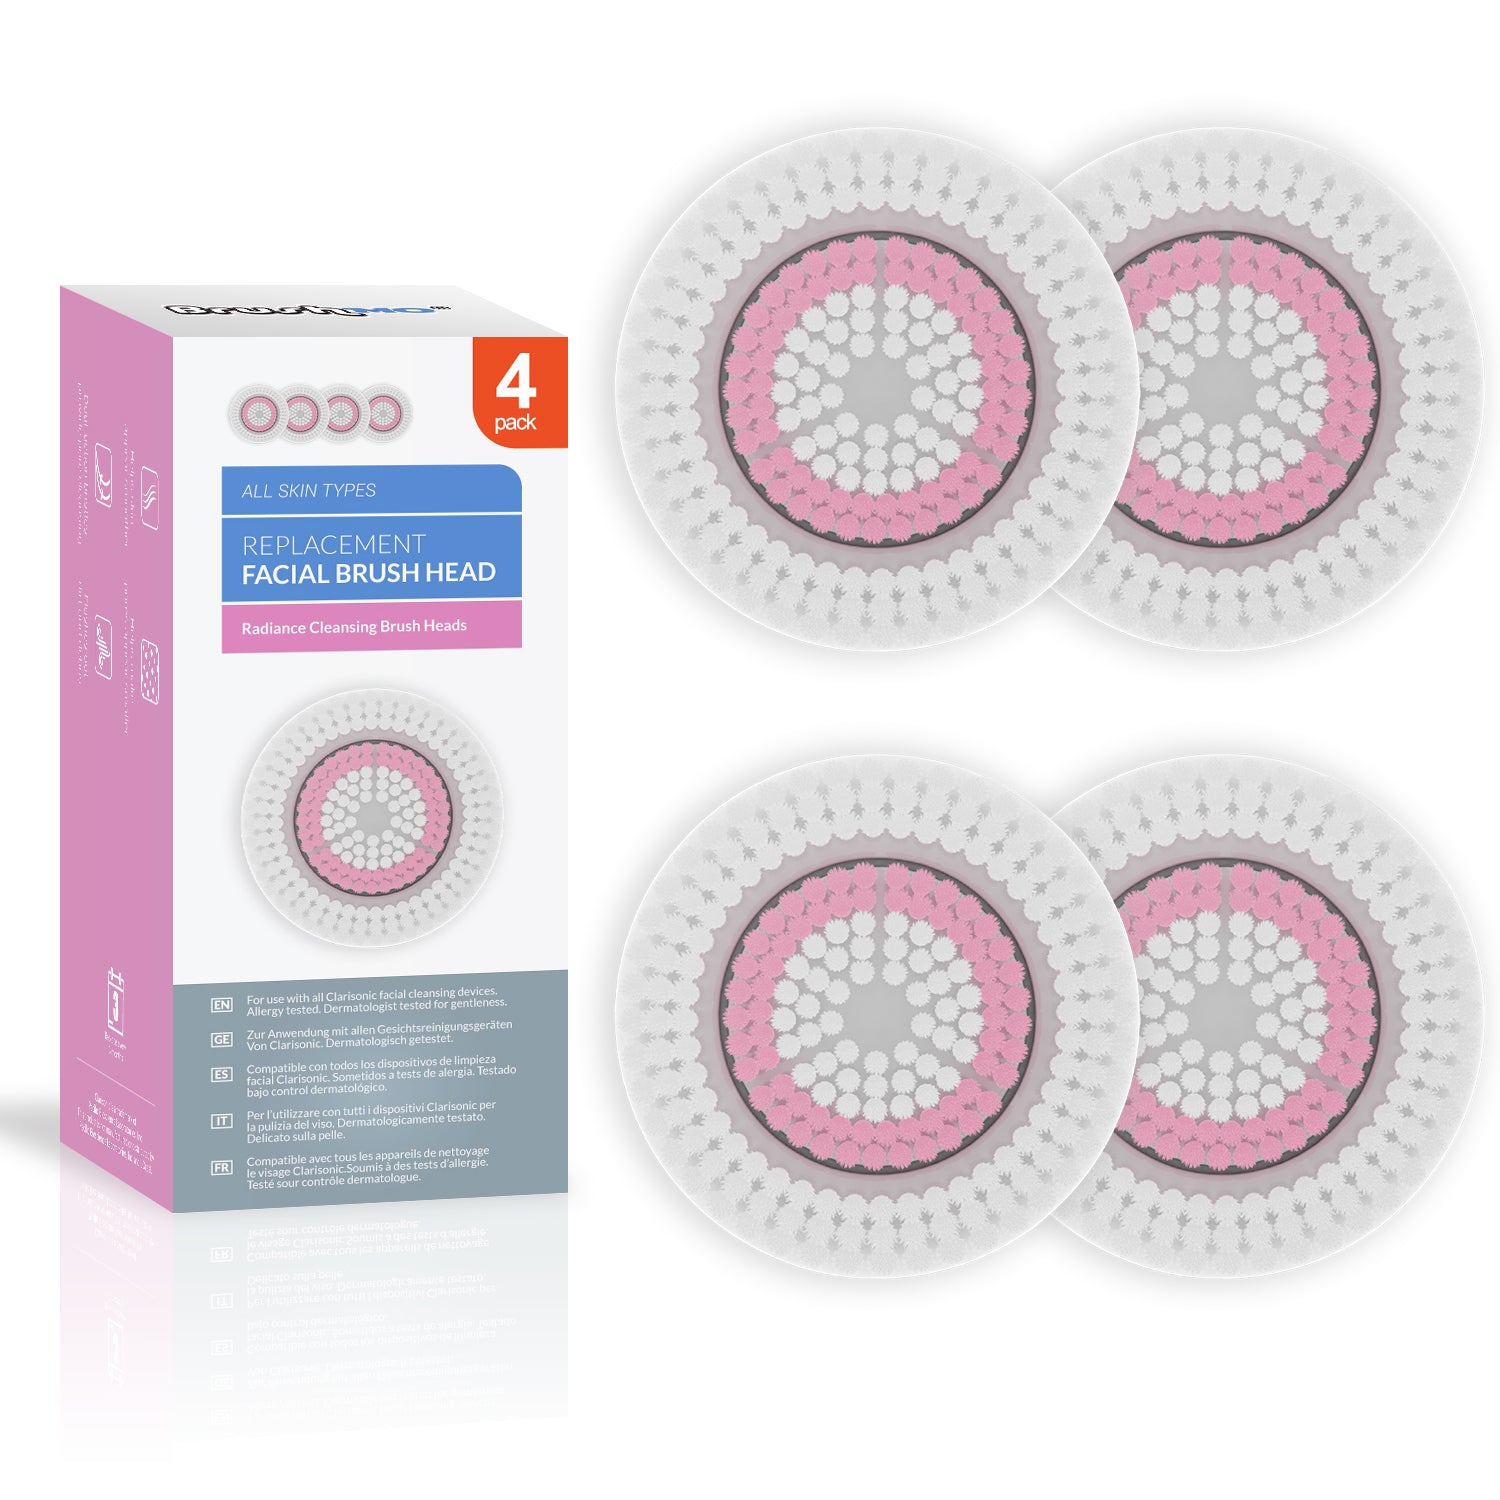 Replacement Facial Cleansing Brush Heads for Clarisonic, Radiance Cleanse, 4-pack